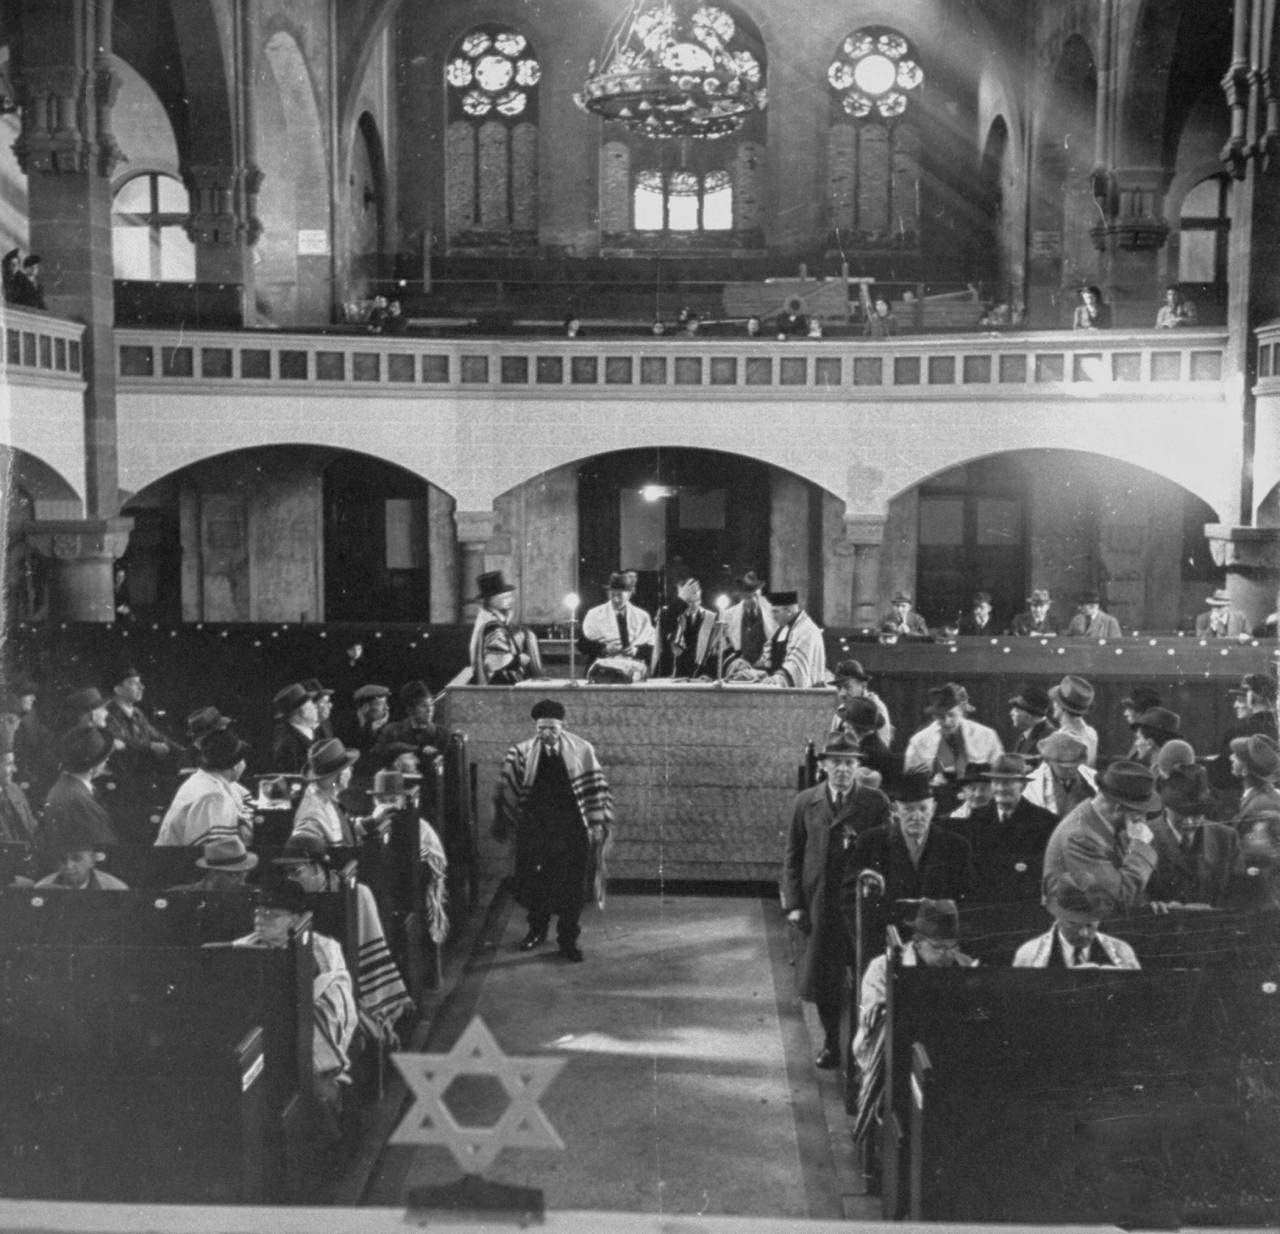 Torah scrolls being read to the congregation in the synagogue during Passover.